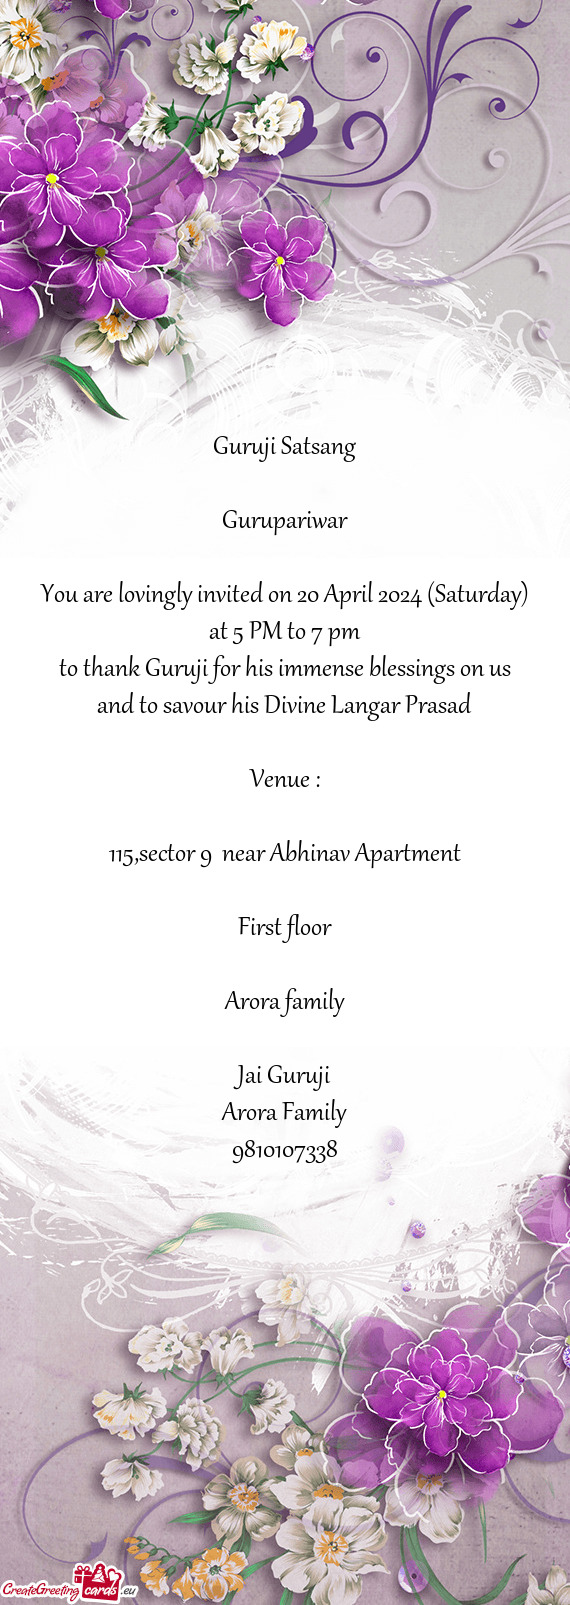 You are lovingly invited on 20 April 2024 (Saturday) at 5 PM to 7 pm